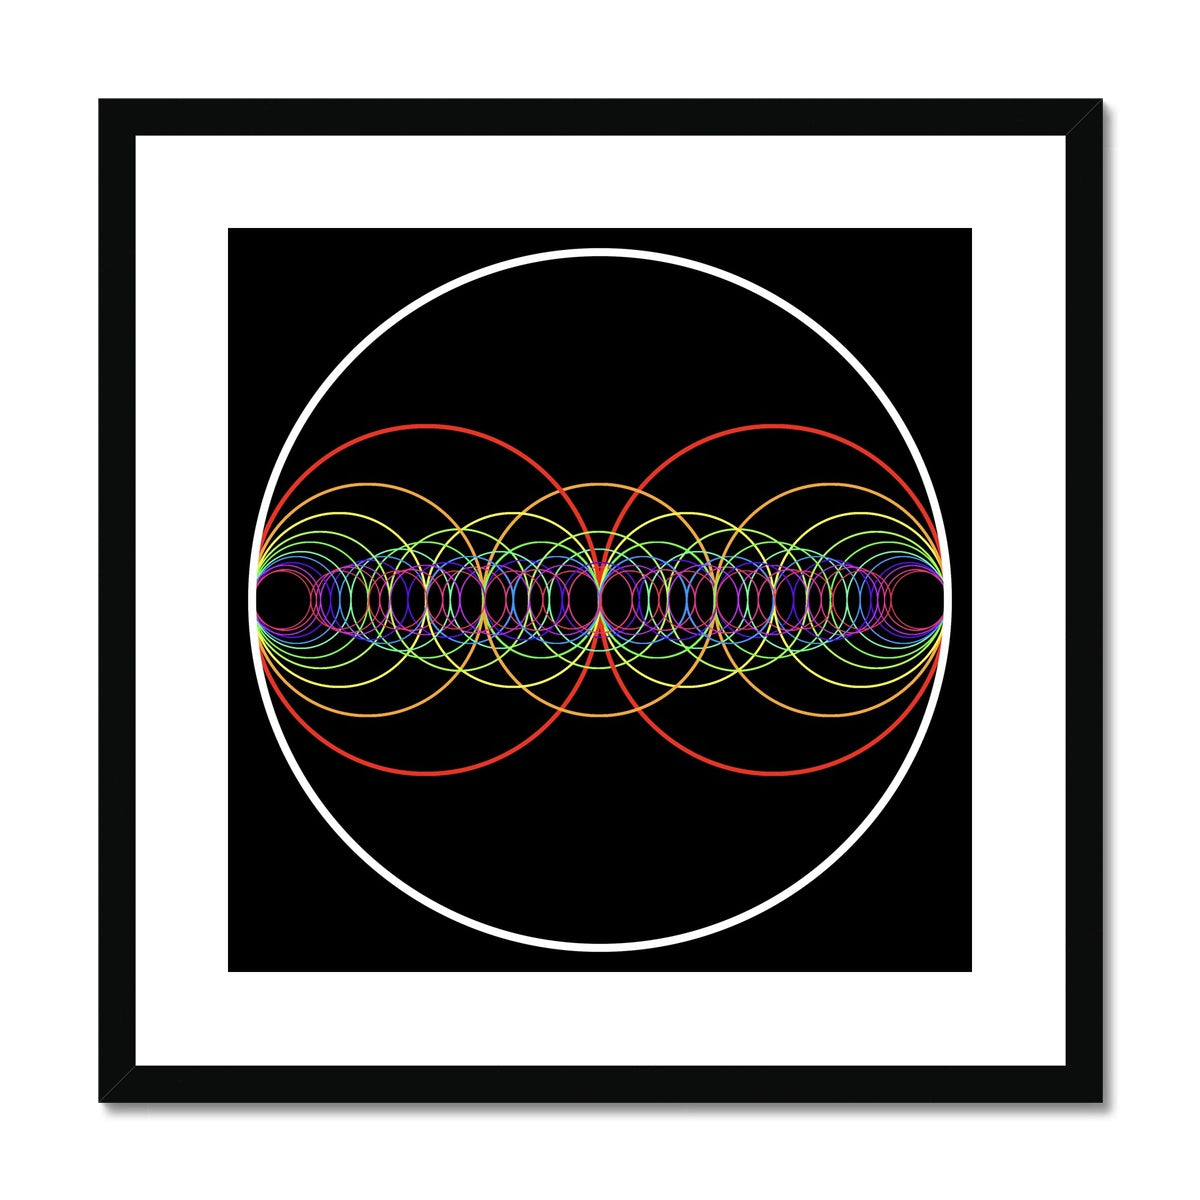 Complete Sound Waves in a Circle Framed & Mounted Print